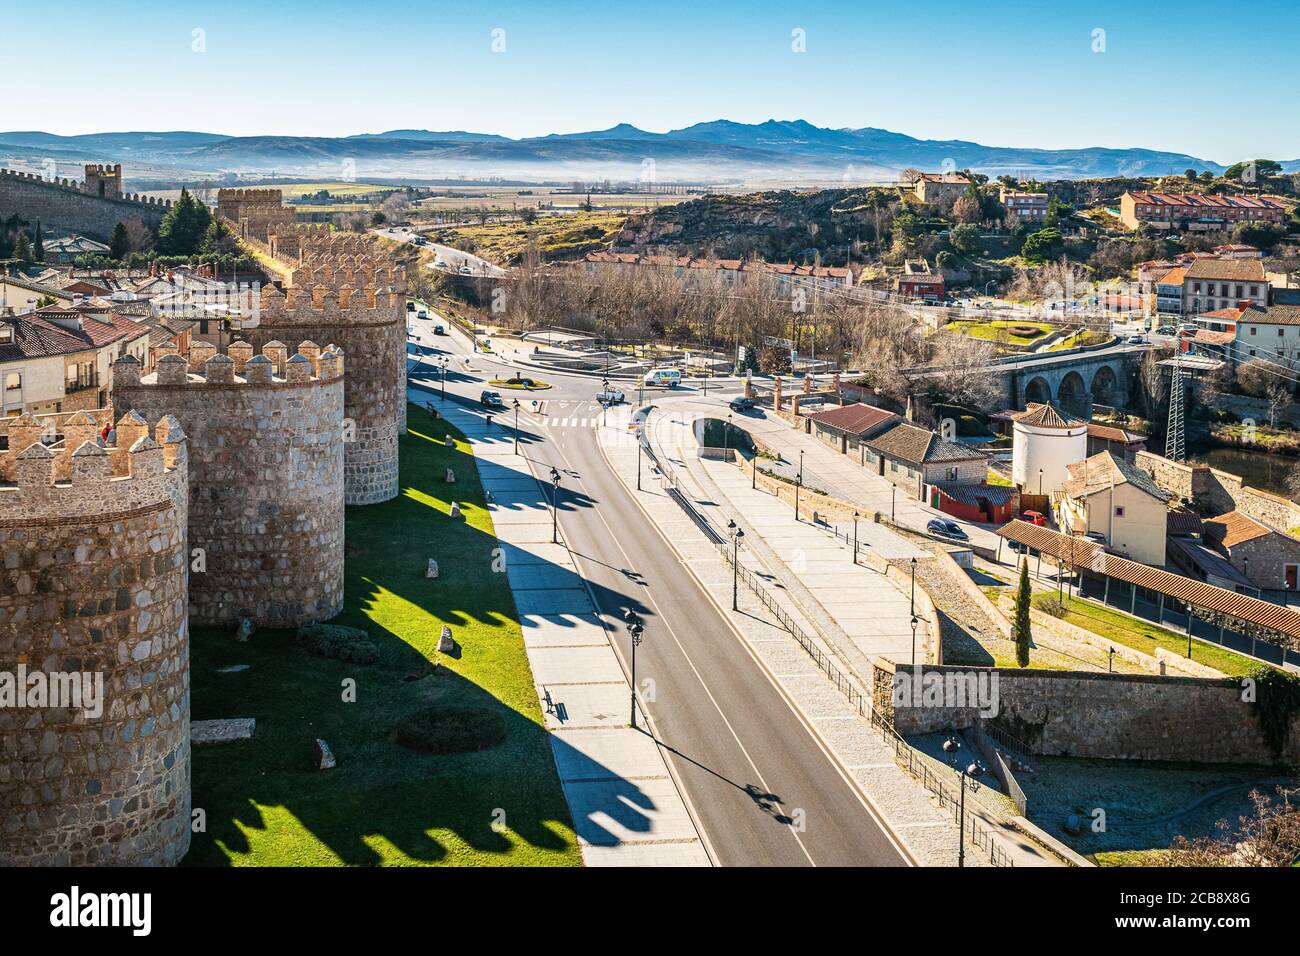 Historic Avila townscape from the famous medieval city walls on a clear winter day. The old town is listed as UNESCO World Heritage site. Stock Photo